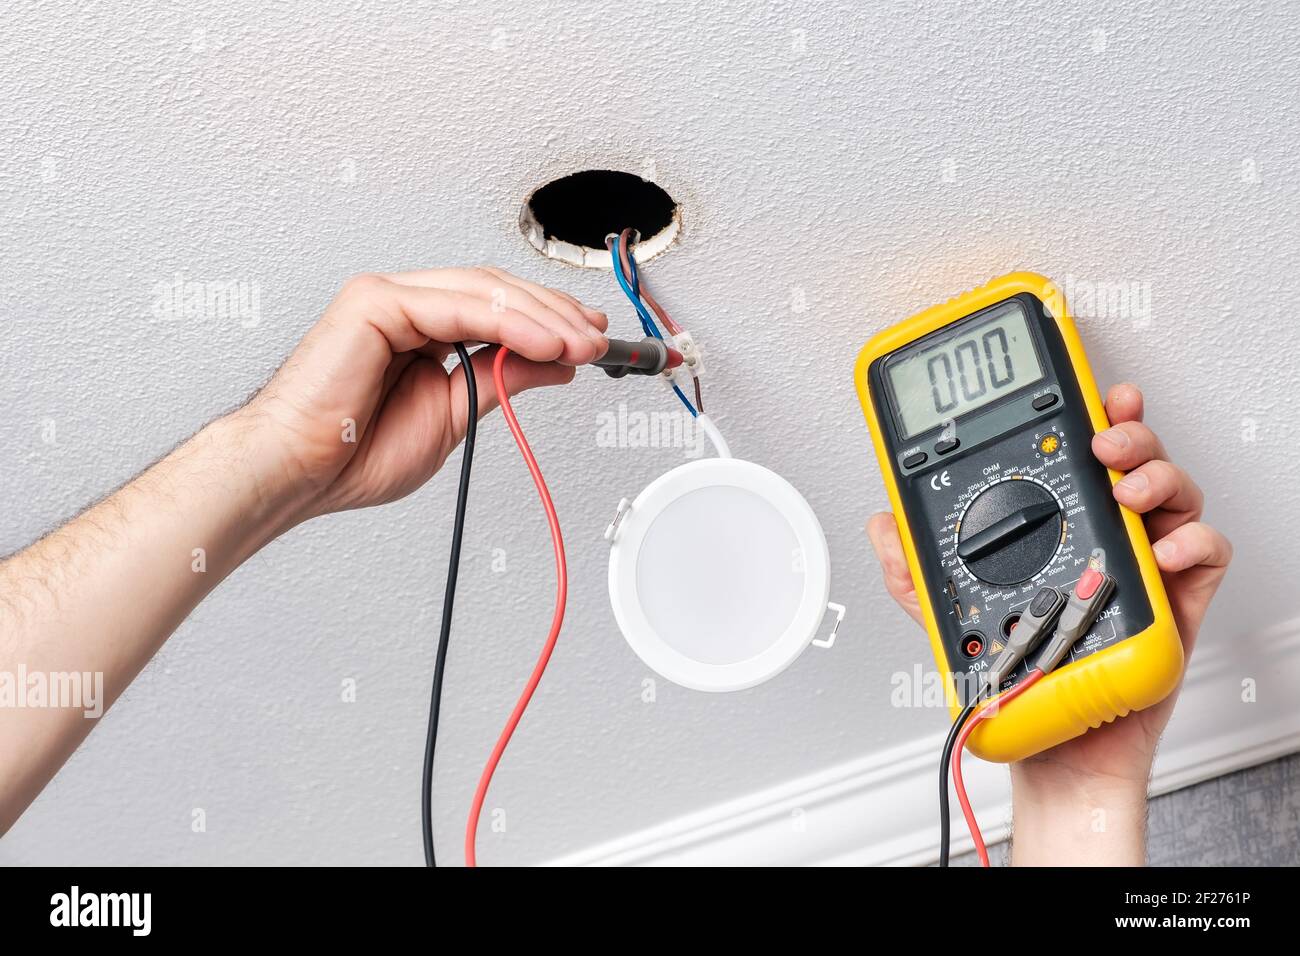 Electrician hands check with tester power supply before installing LED light Stock Photo